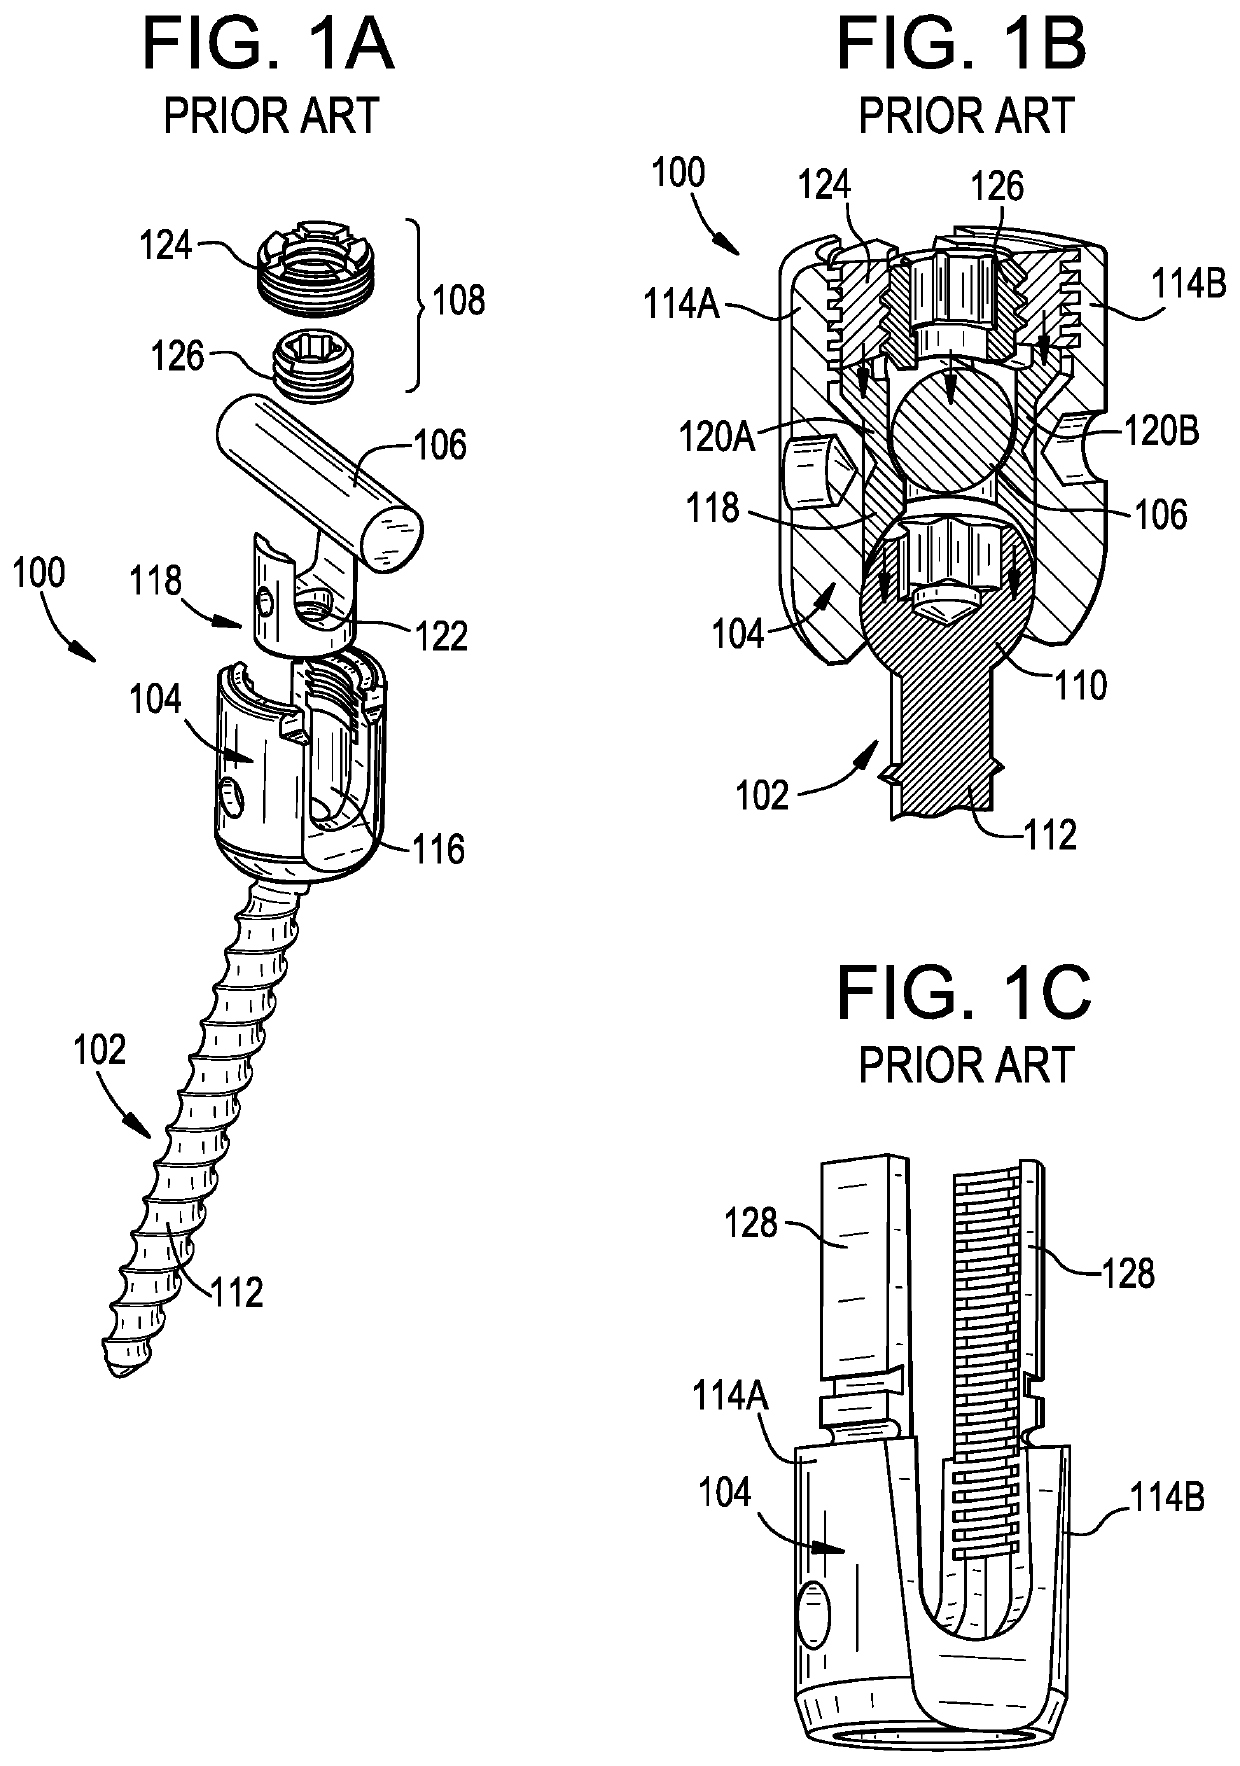 Multipoint fixation implants and related methods